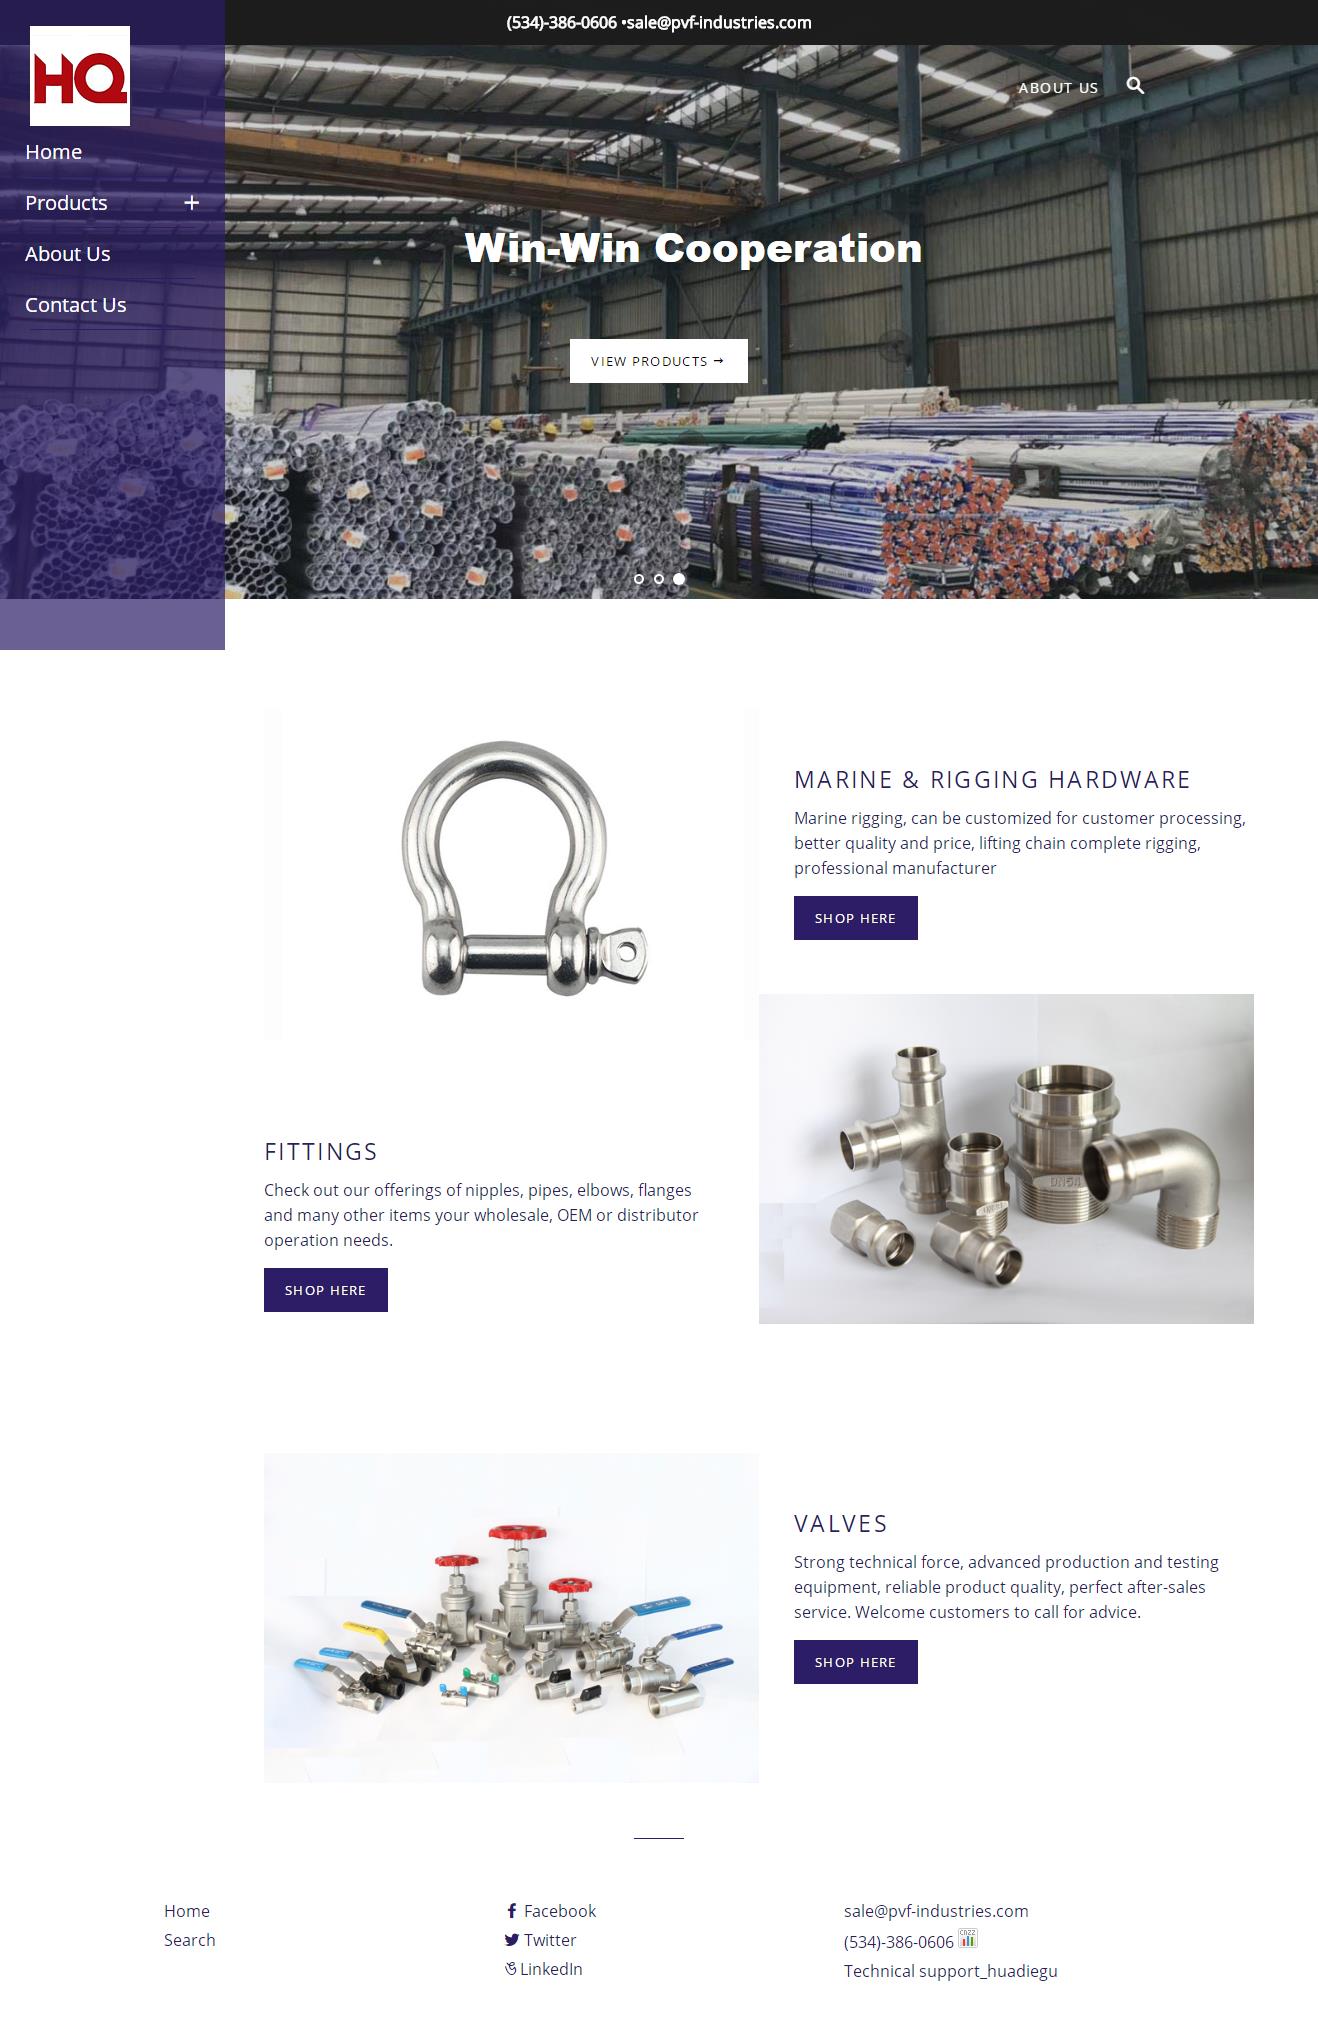 HQ Valves And Fittings Mfg Co.